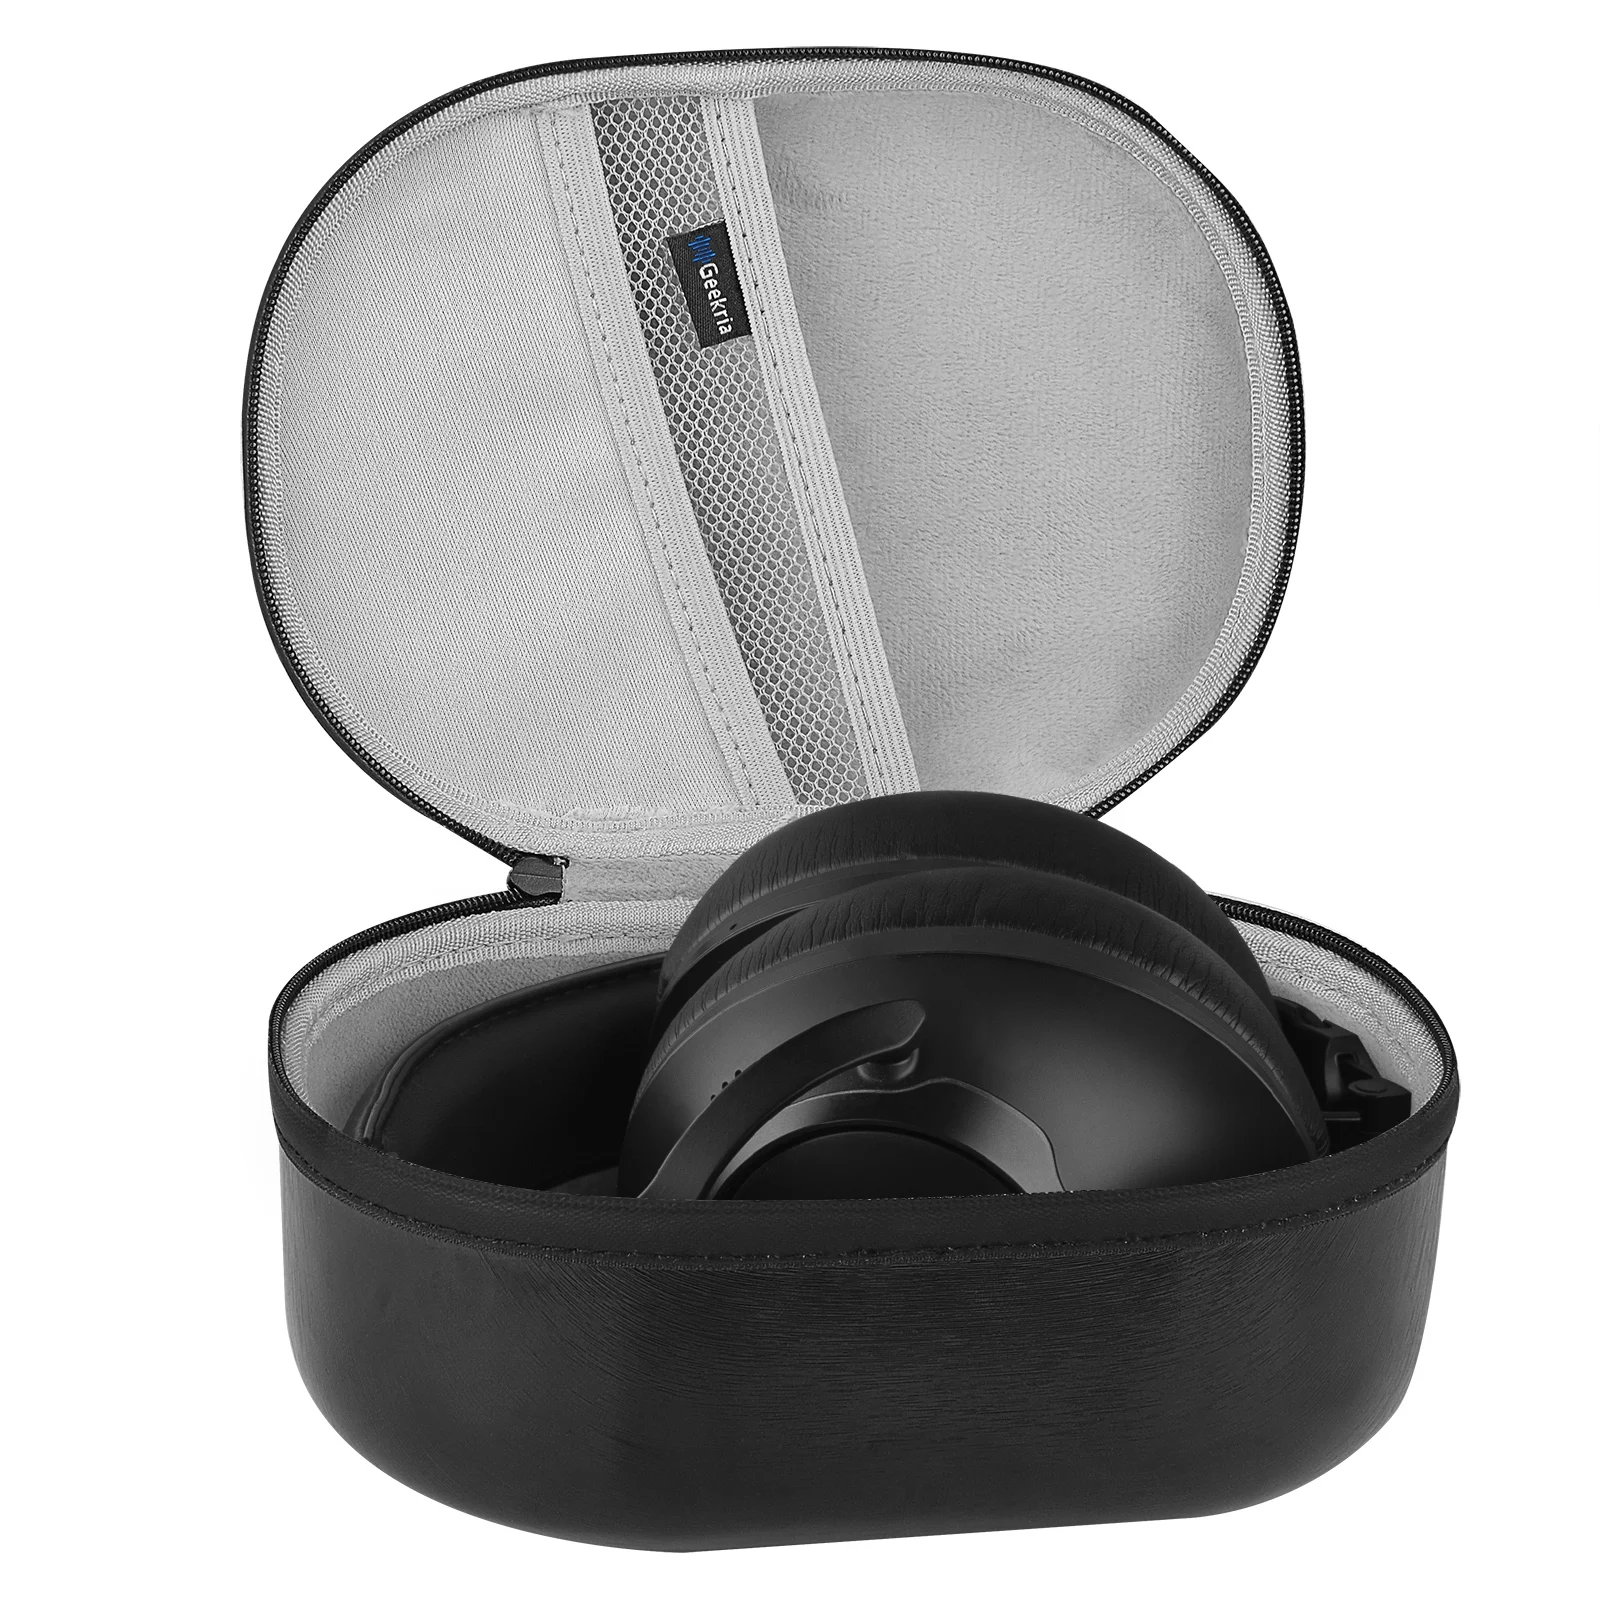 

Geekria Headphones Case For JBL Tour ONE, Live 650 BTNC Hard Portable Bluetooth Earphones Headset Bag For Accessories Storage